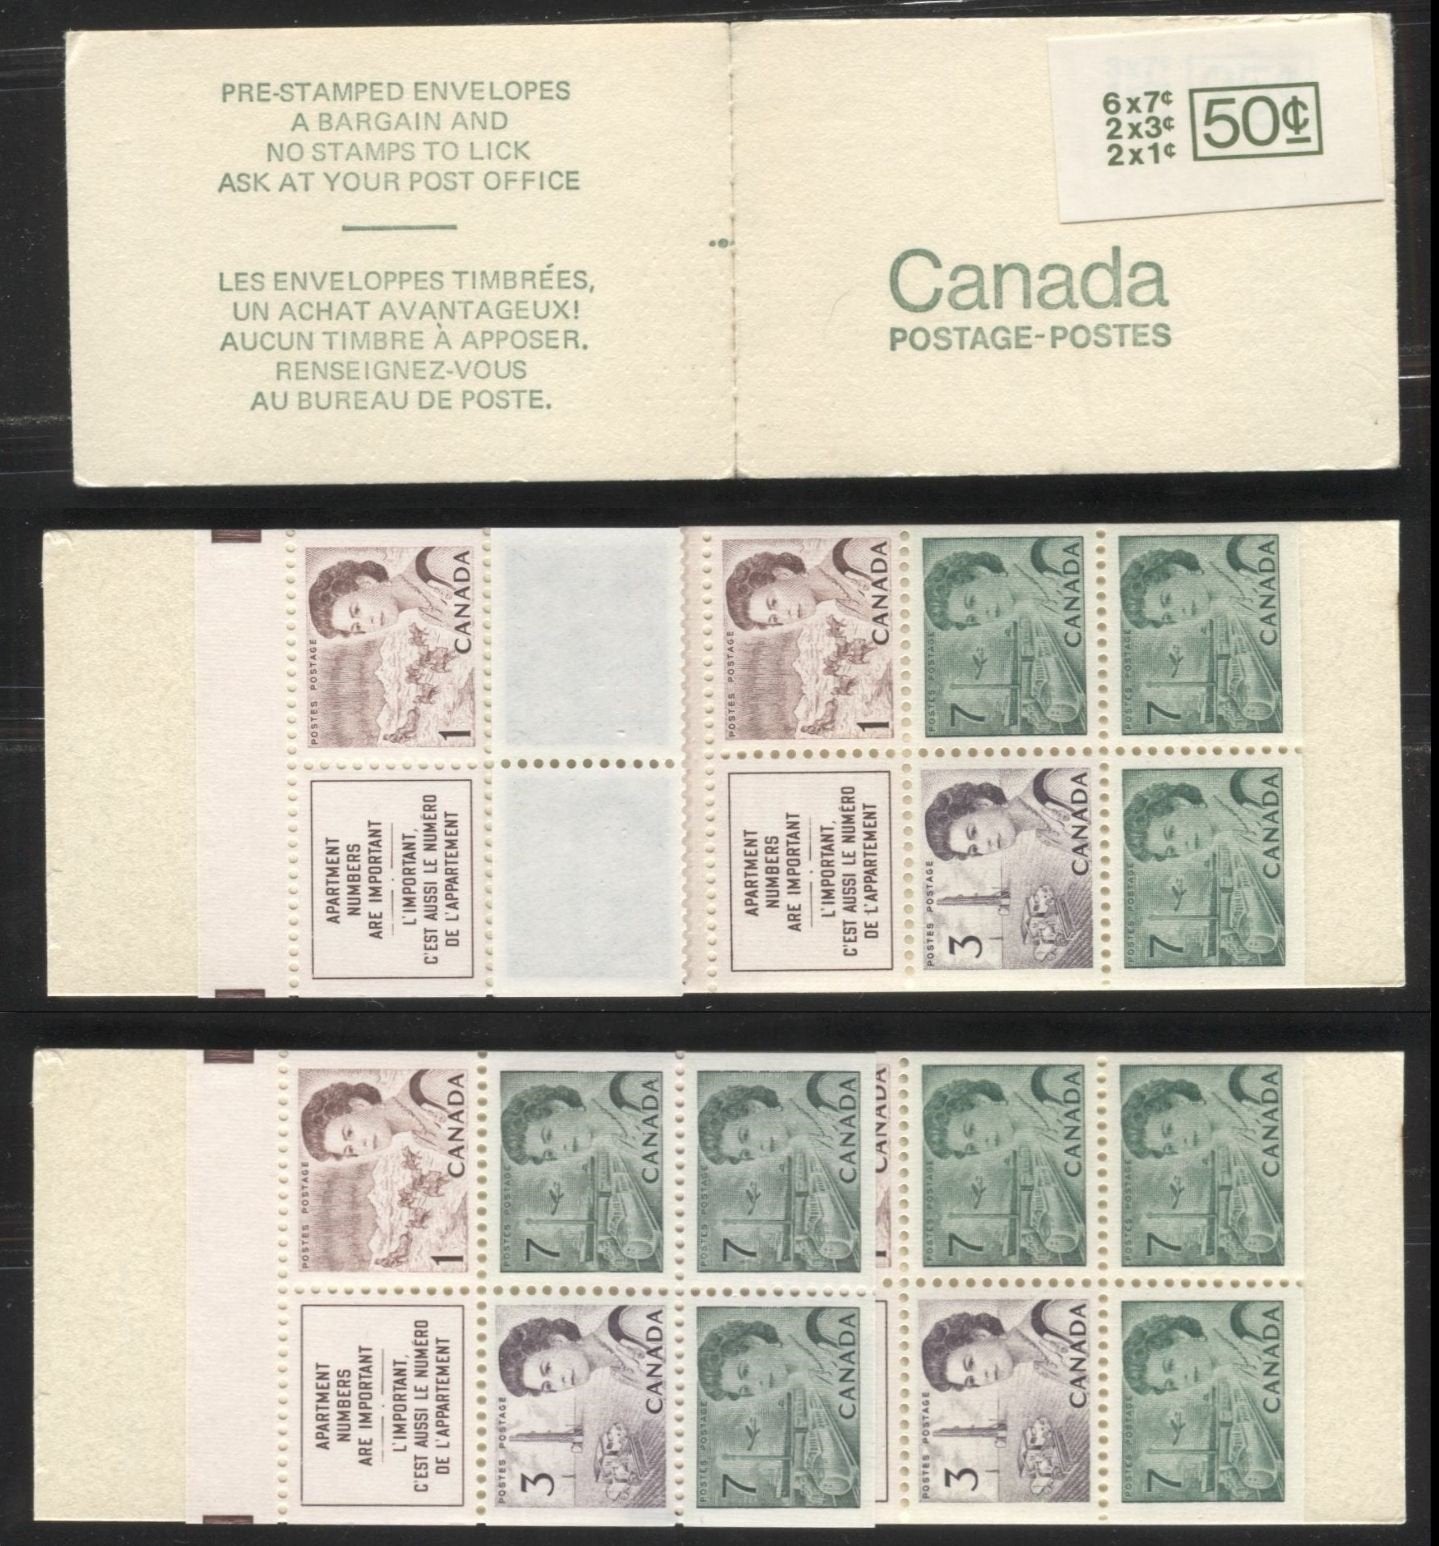 Lot #48 Canada #BK68b 1c Purple Brown, 3c Slate Purple, And 7c Slate Green & Emerald, 1967-1973 Centennial Issue, A VFNH 50c Booklet, Type 2 Pre Stamped Cover, Clear Seal Strip, MF-fl & LF-fl Paper, Large Glossy Sticker, With Offset of Cover Text